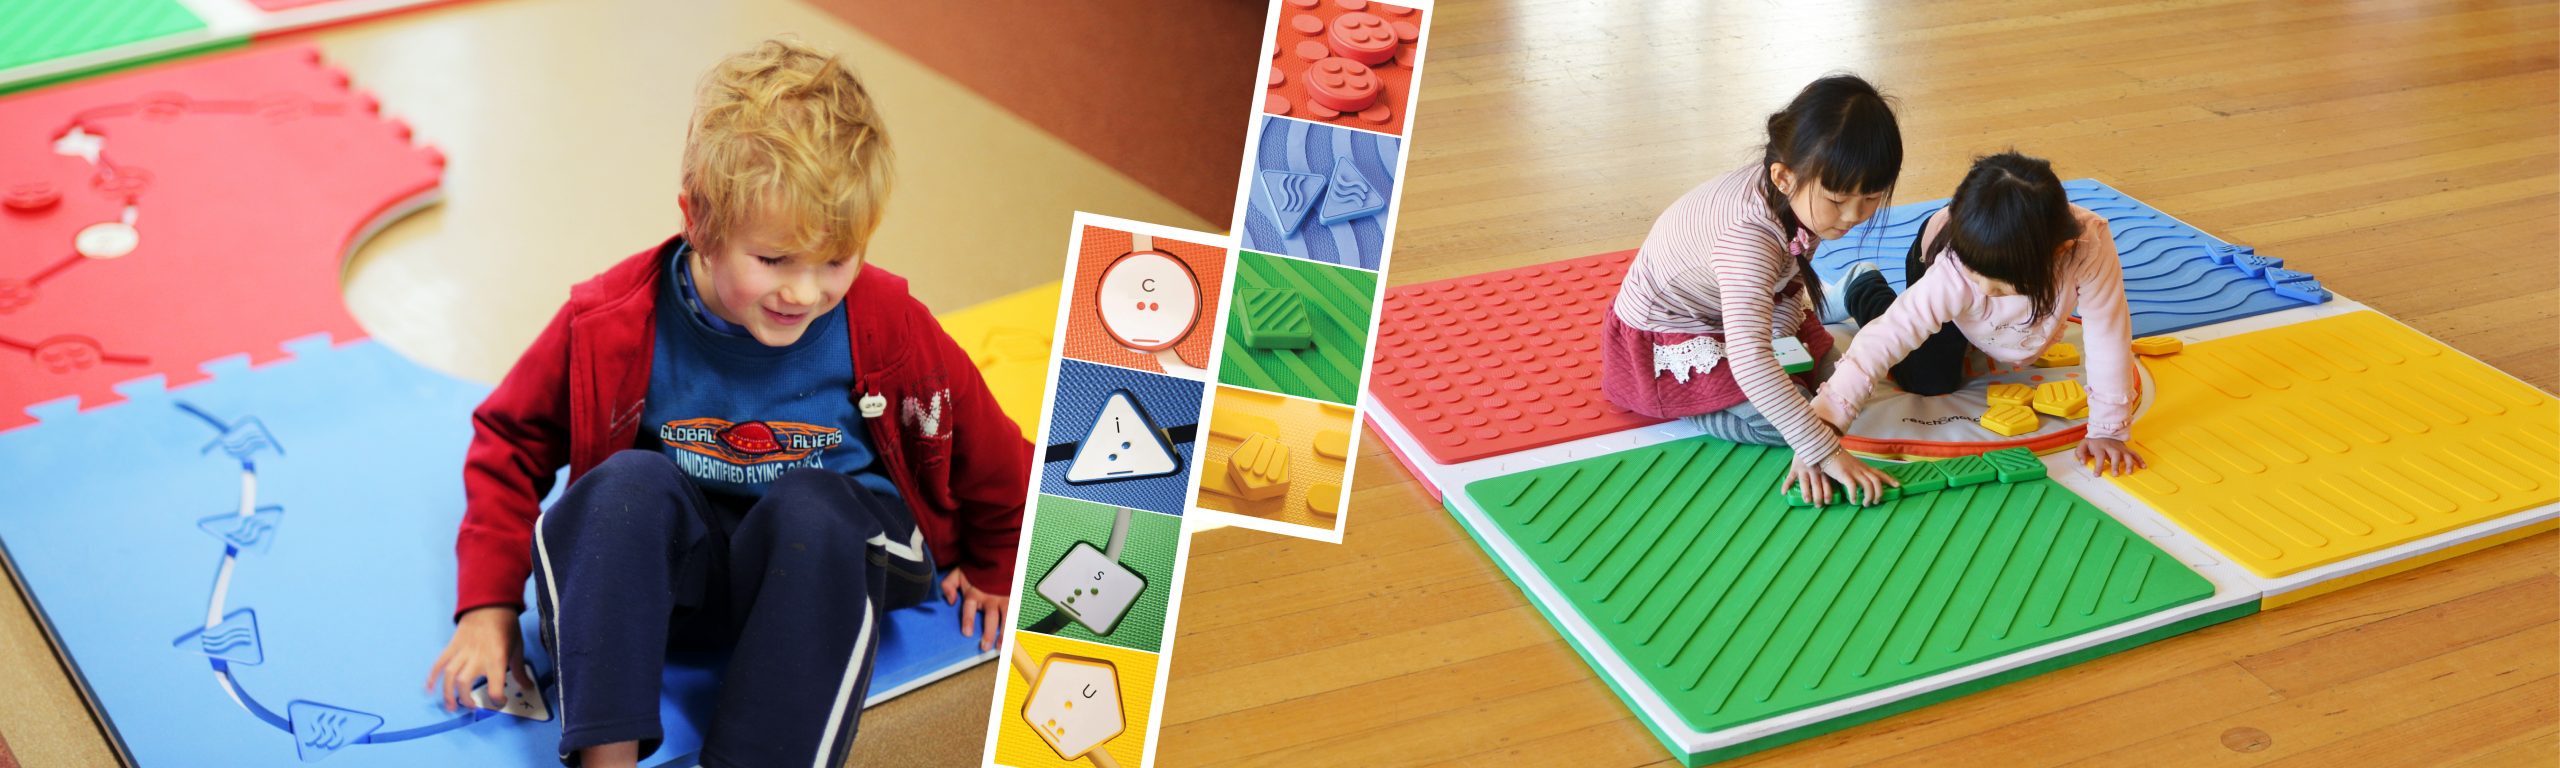 young children with disabillities playing on reach and match playmats